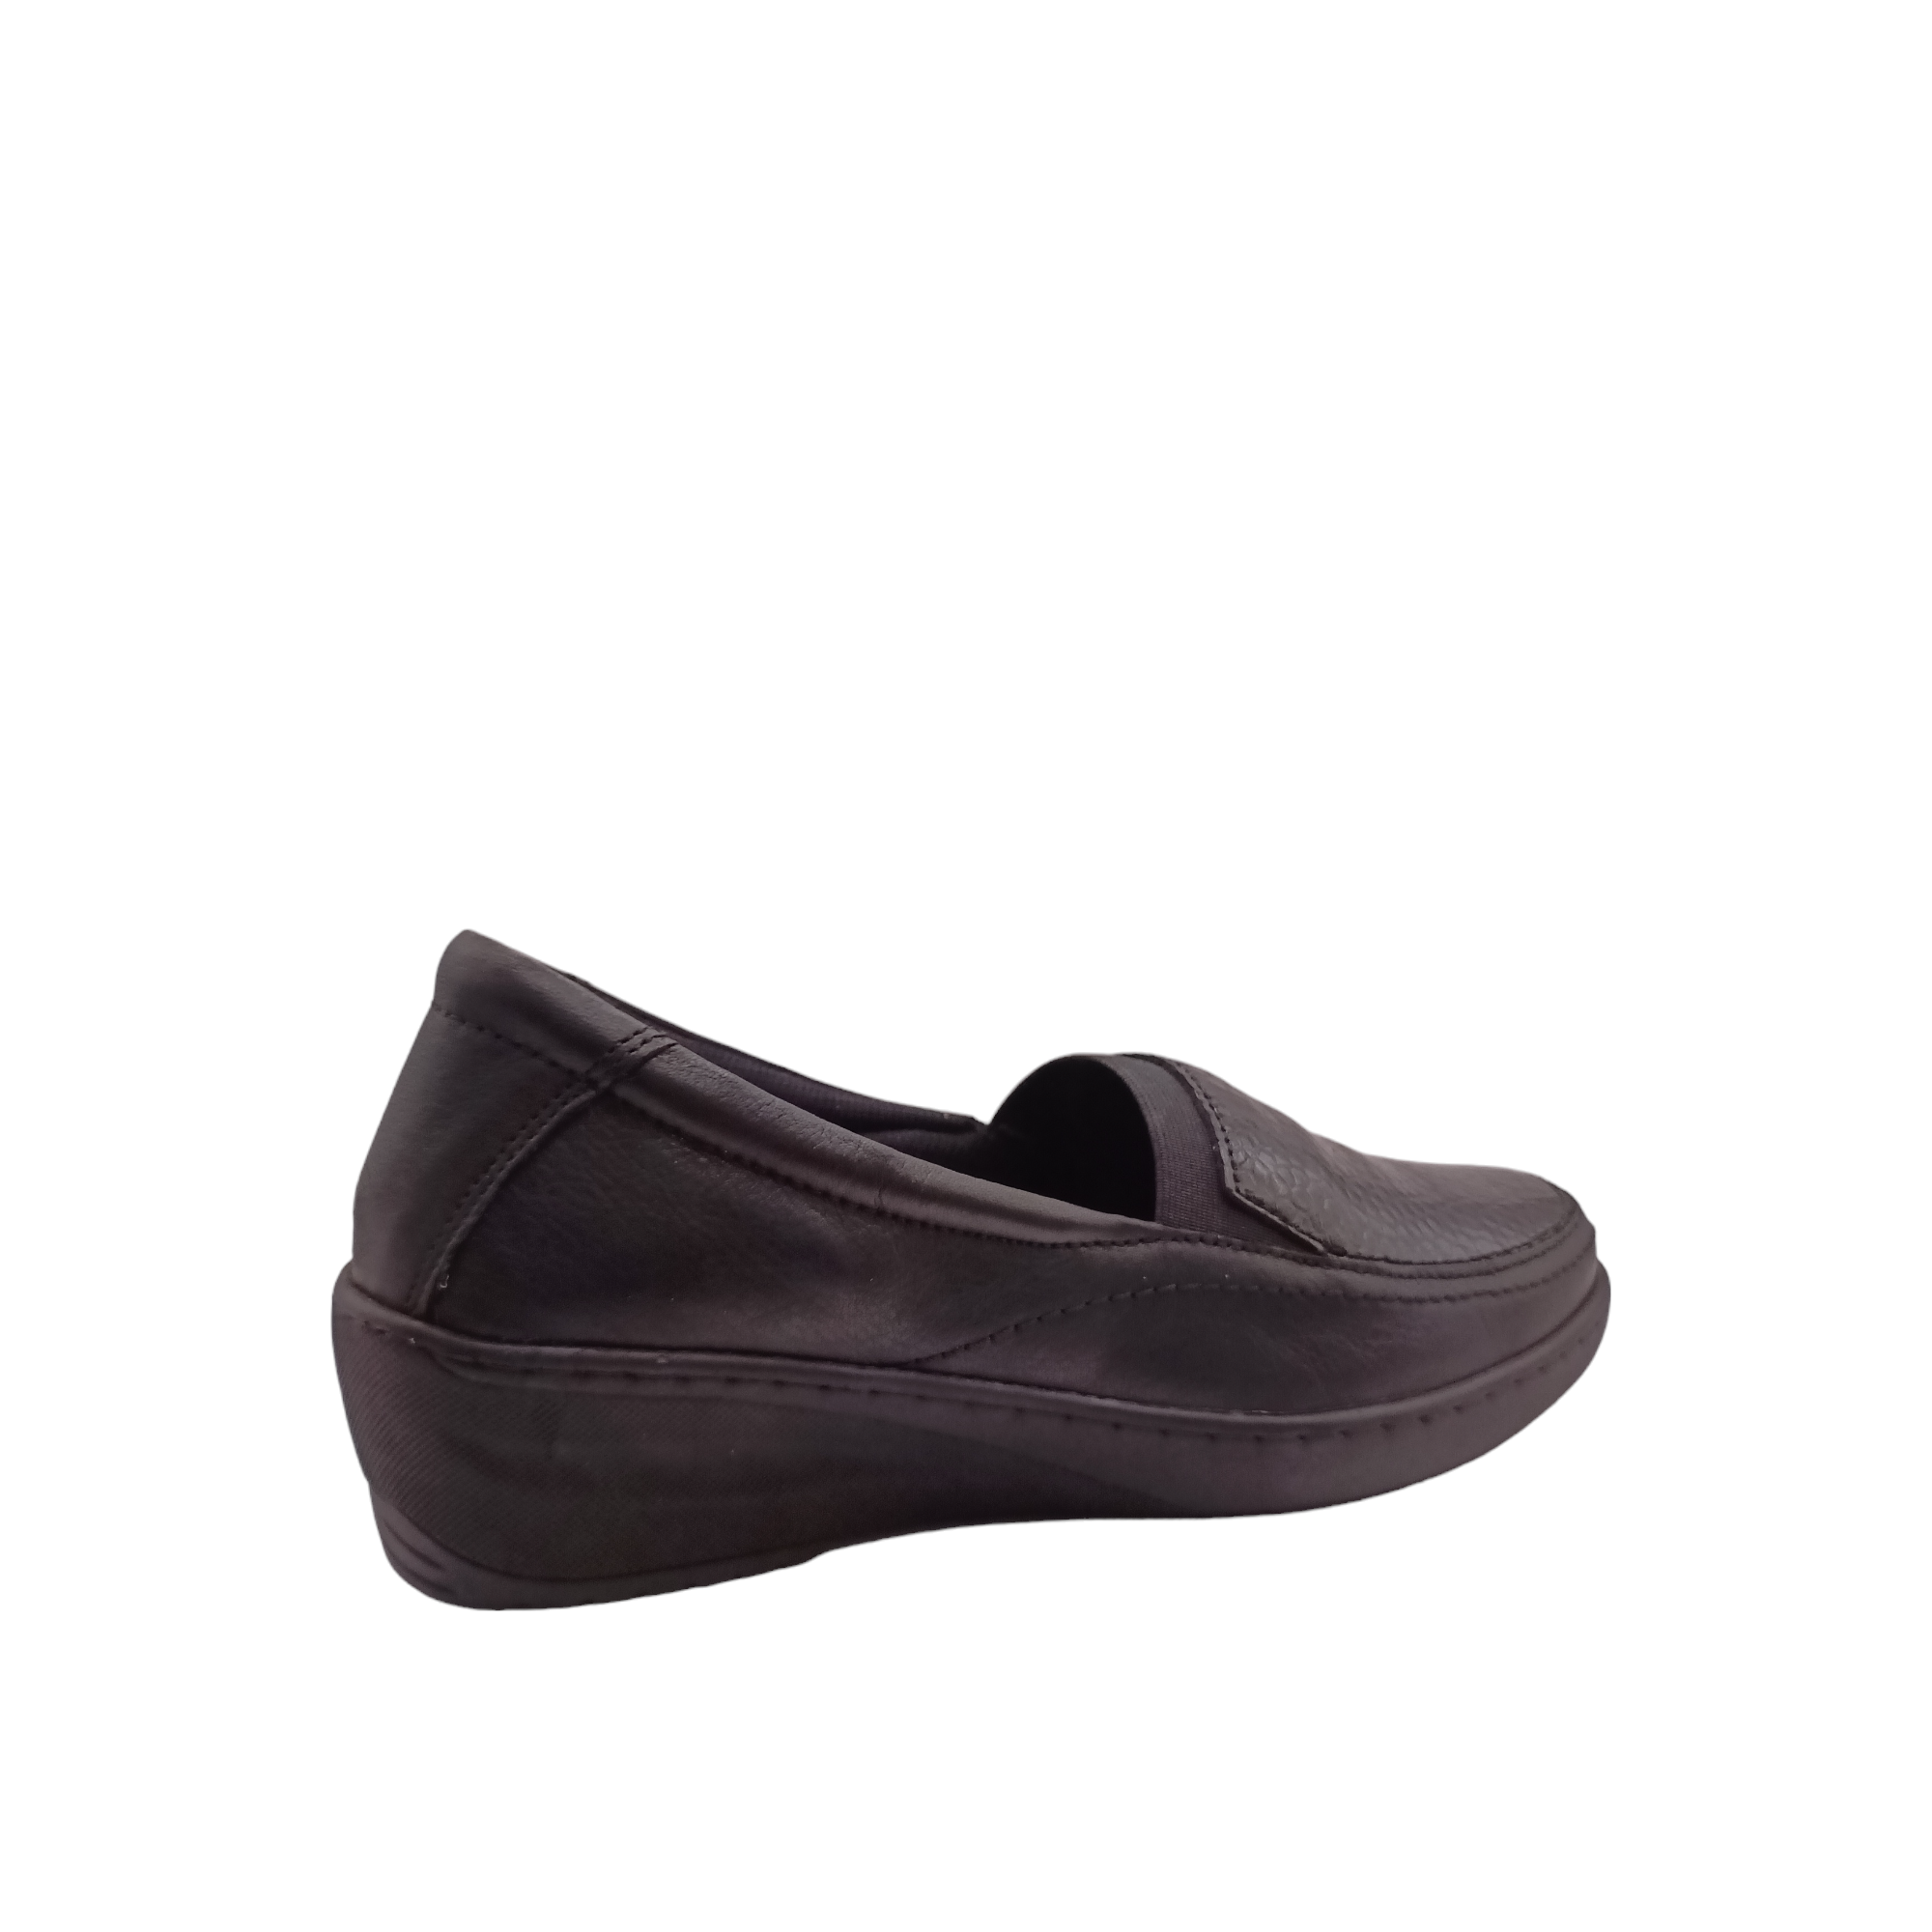 Shop CP149-18 Cabello - with shoe&me - from Cabello - Shoes - Shoe, Winter, Womens - [collection]